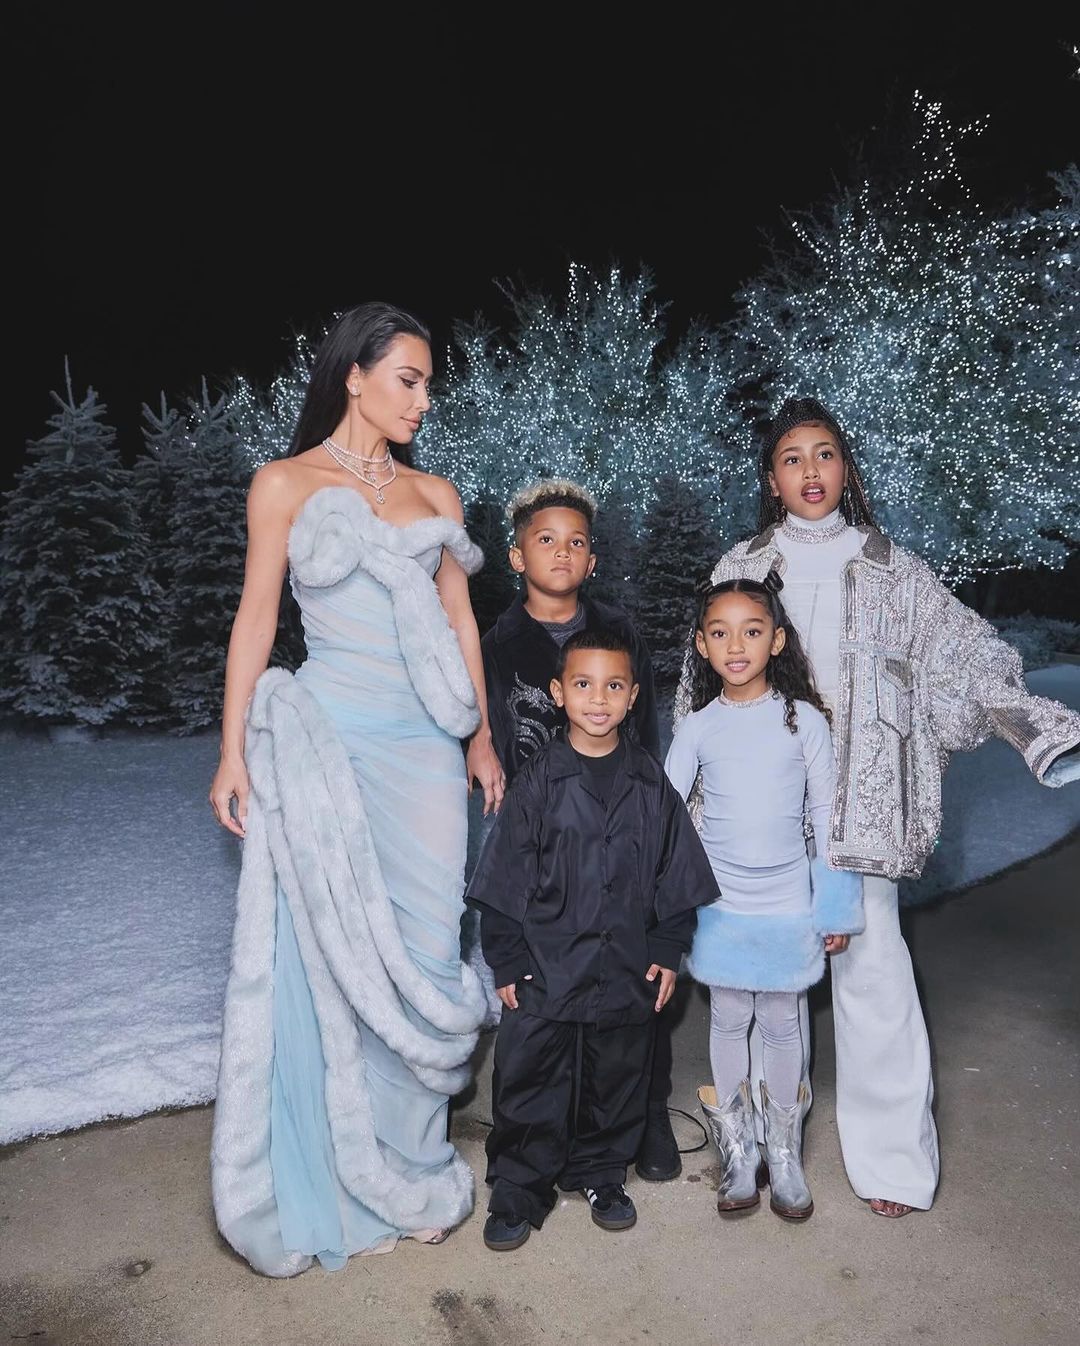 Kim Kardashian with children at a holiday party